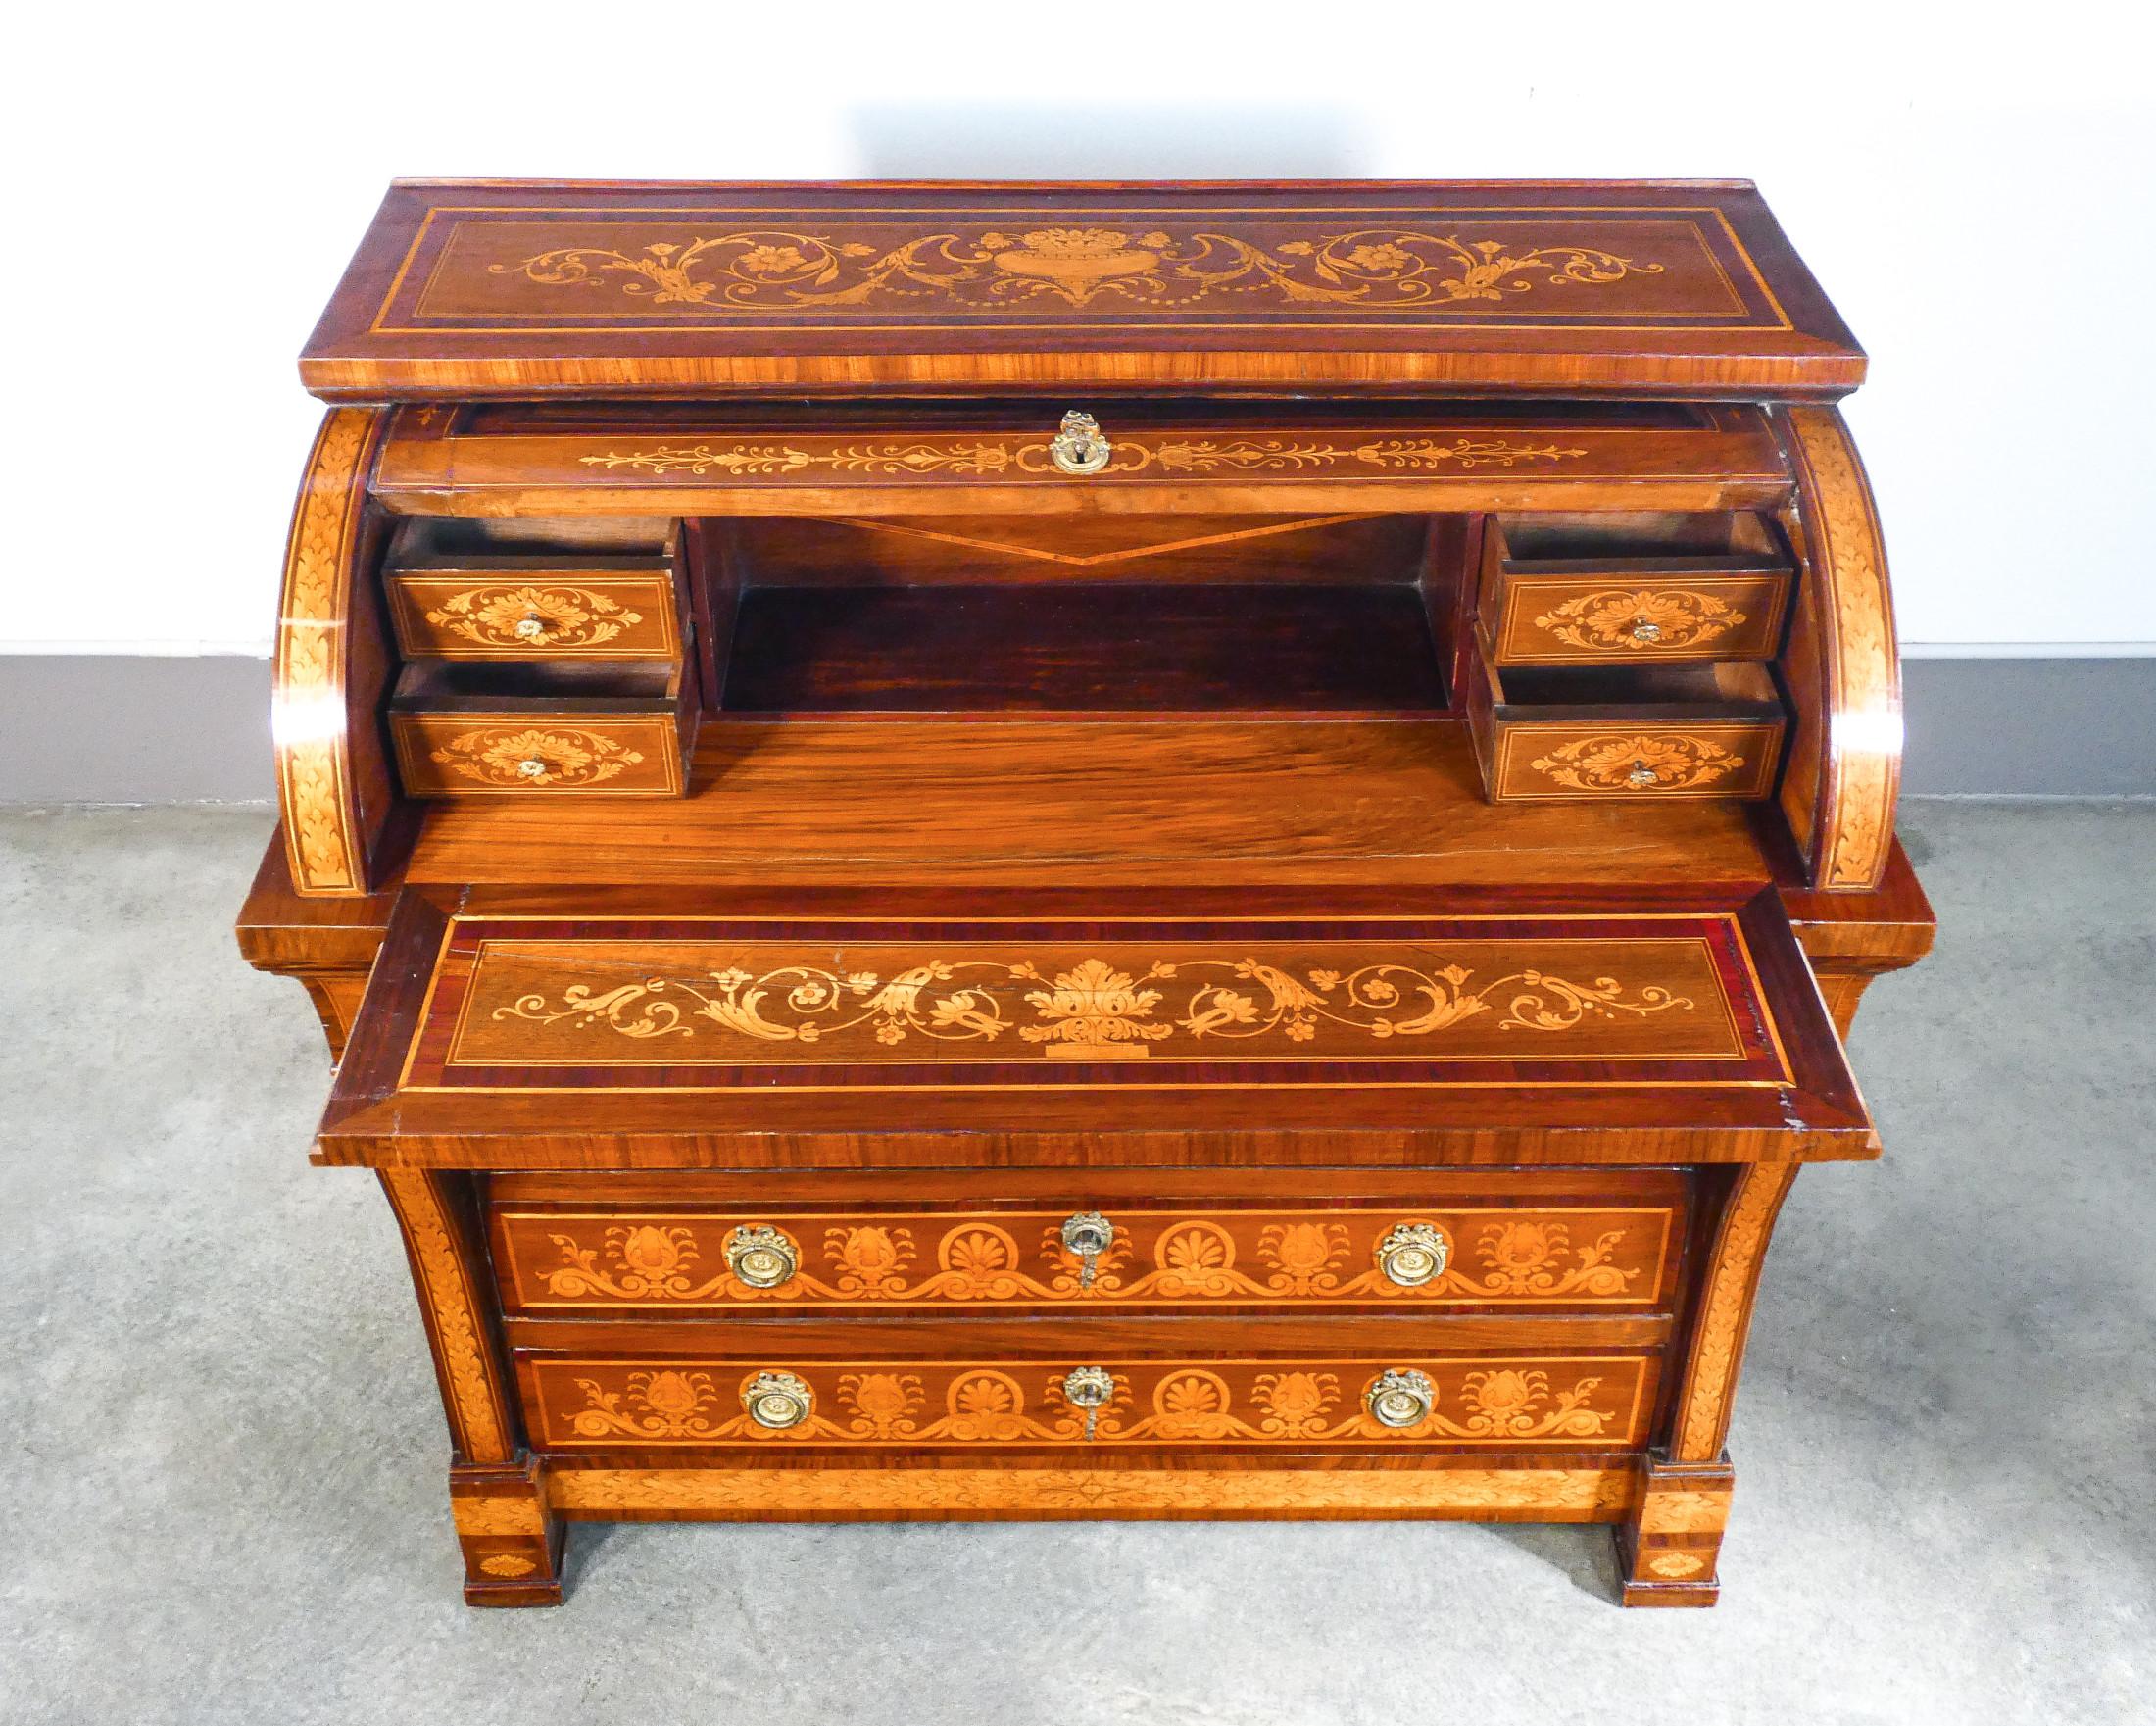 Empire Secretaire with Writing Desk, Richly Inlaid Wood. Italy Late 18th Century For Sale 3